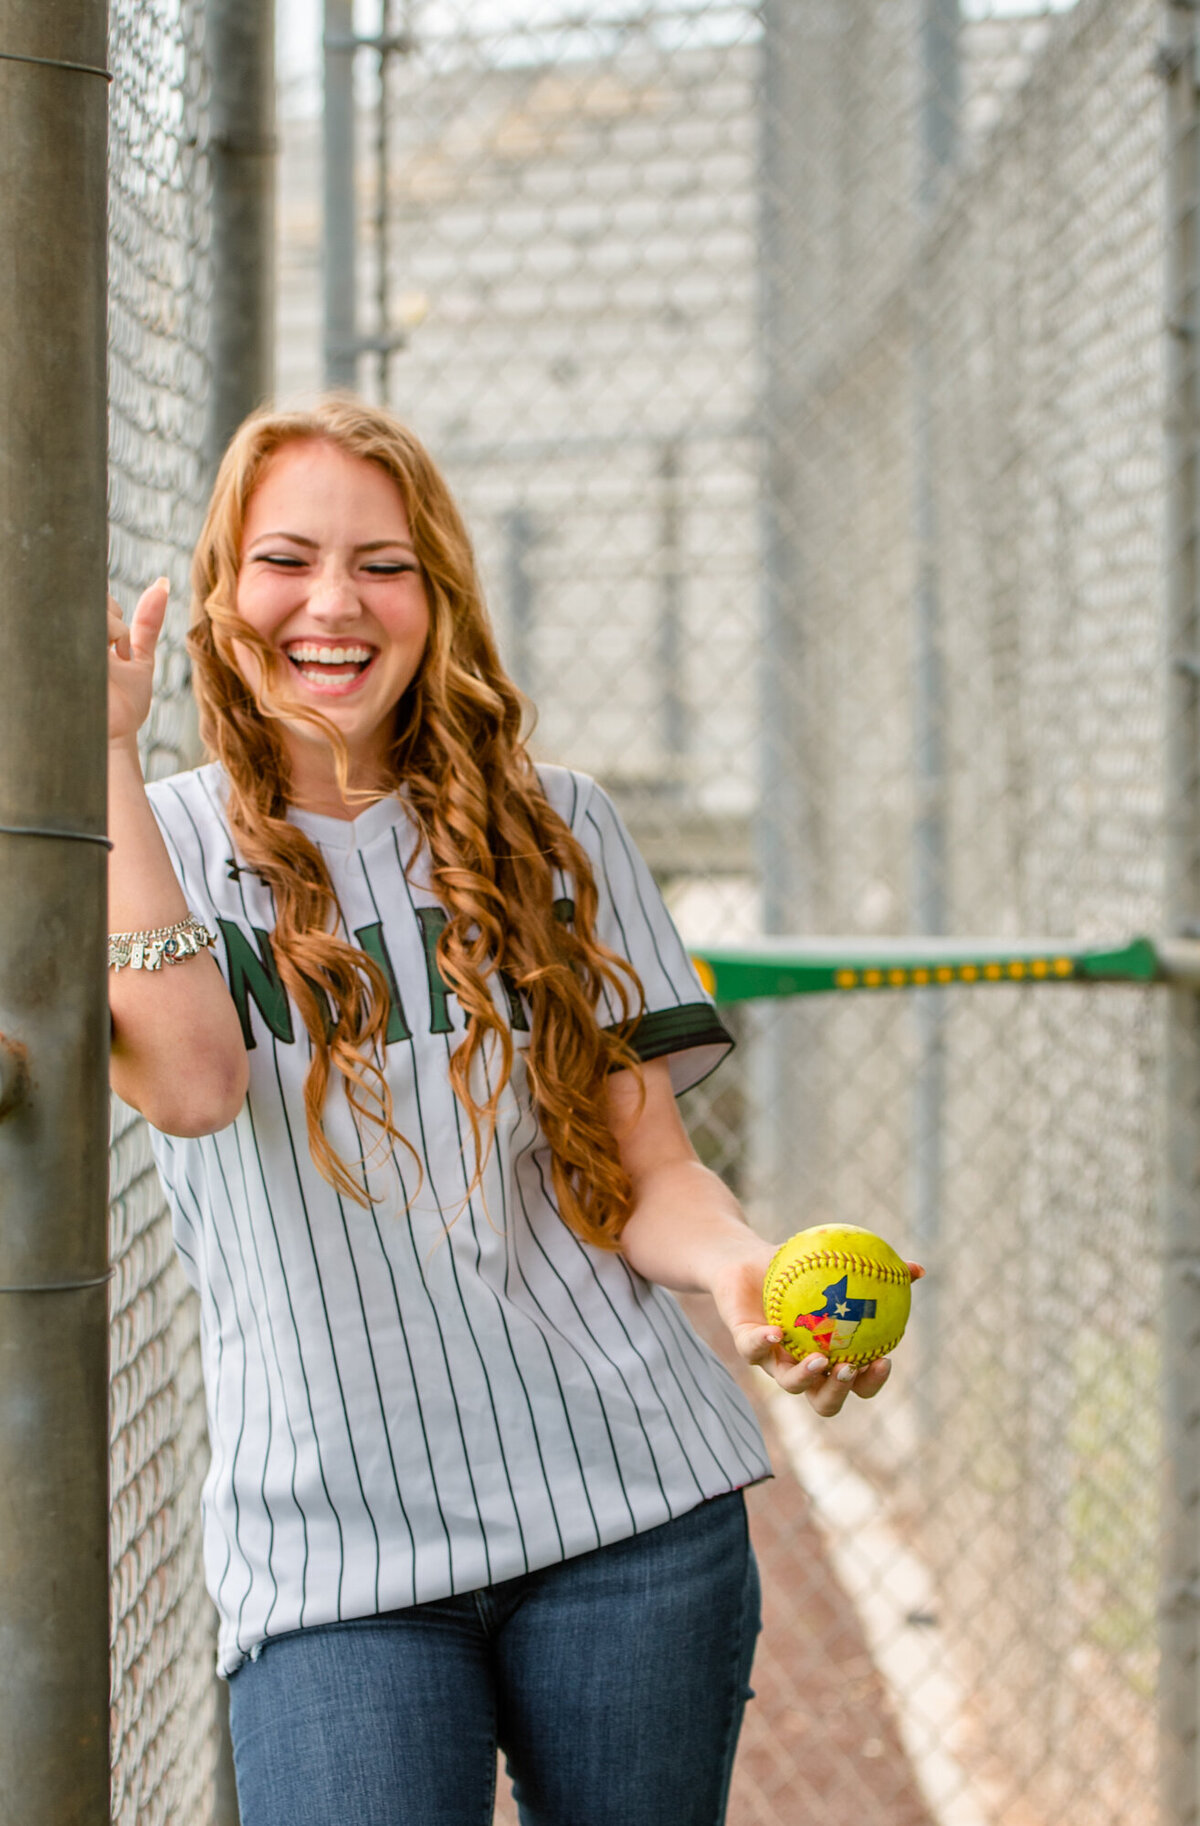 A high school softball player leans against a dugout fence and holds a softball with a big smile.